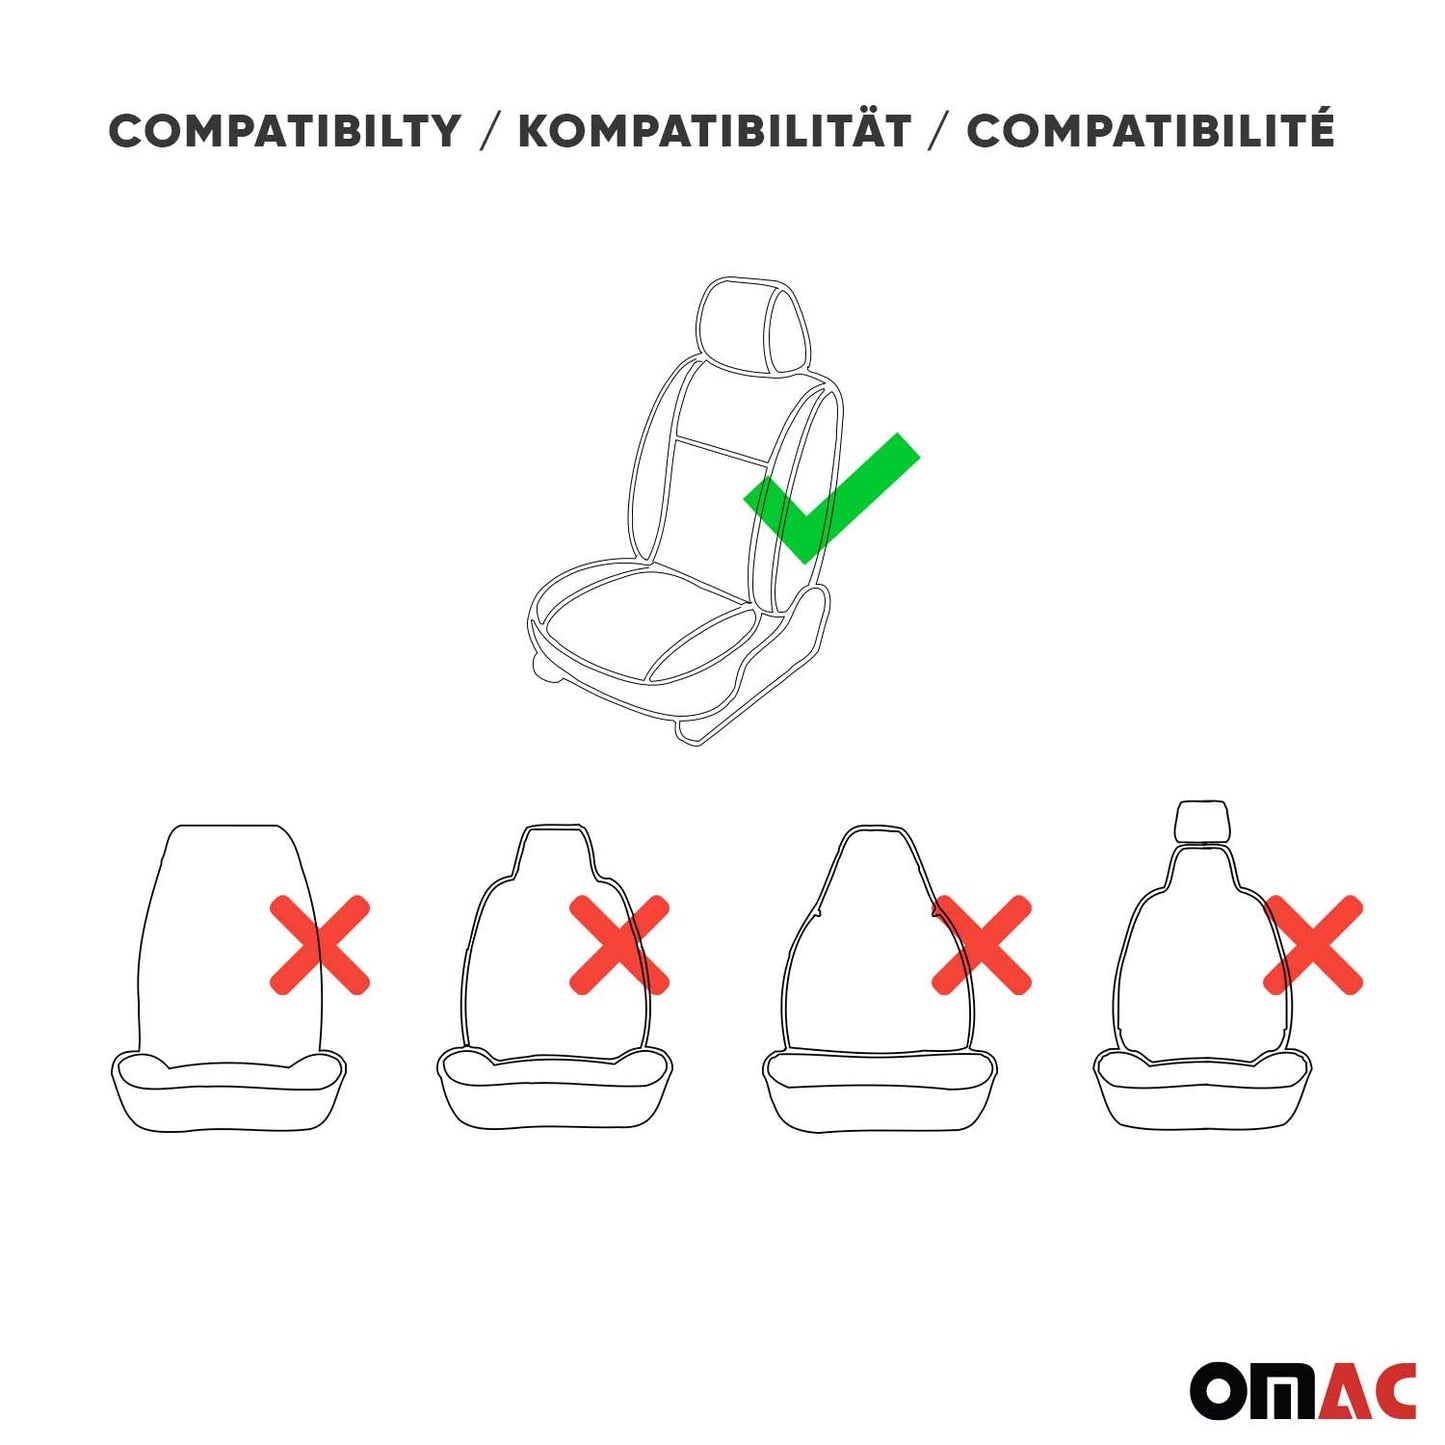 OMAC 2x Car Front Seat Cover Cushion Breathable Protection Non Slip Grey Black 96311A-GS1SET